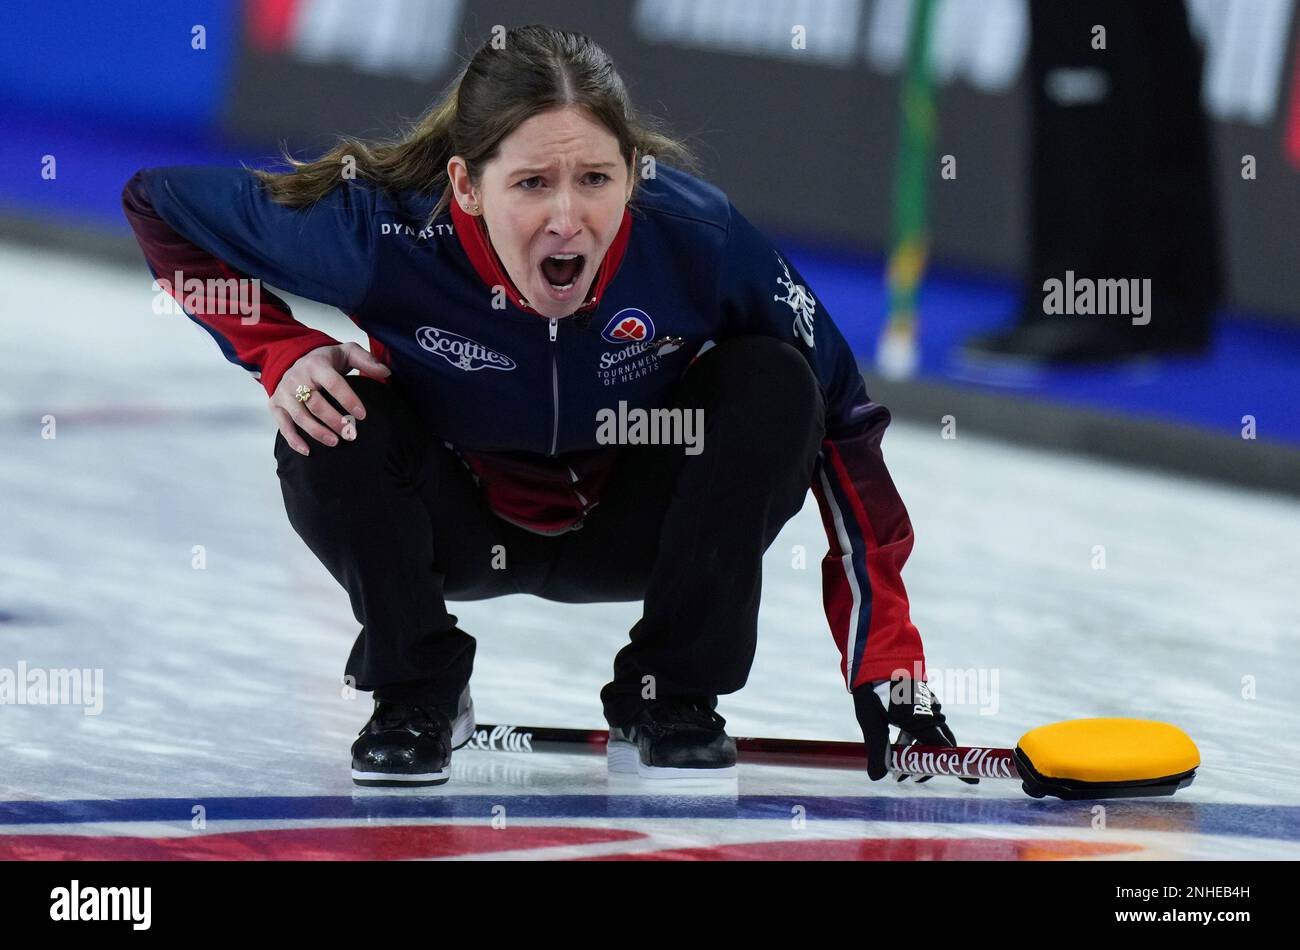 Team Wild Card 1 skip Kaitlyn Lawes calls out to the sweepers while playing Saskatchewan at the Scotties Tournament of Hearts curling event in Kamloops, British Columbia, Tuesday, Feb